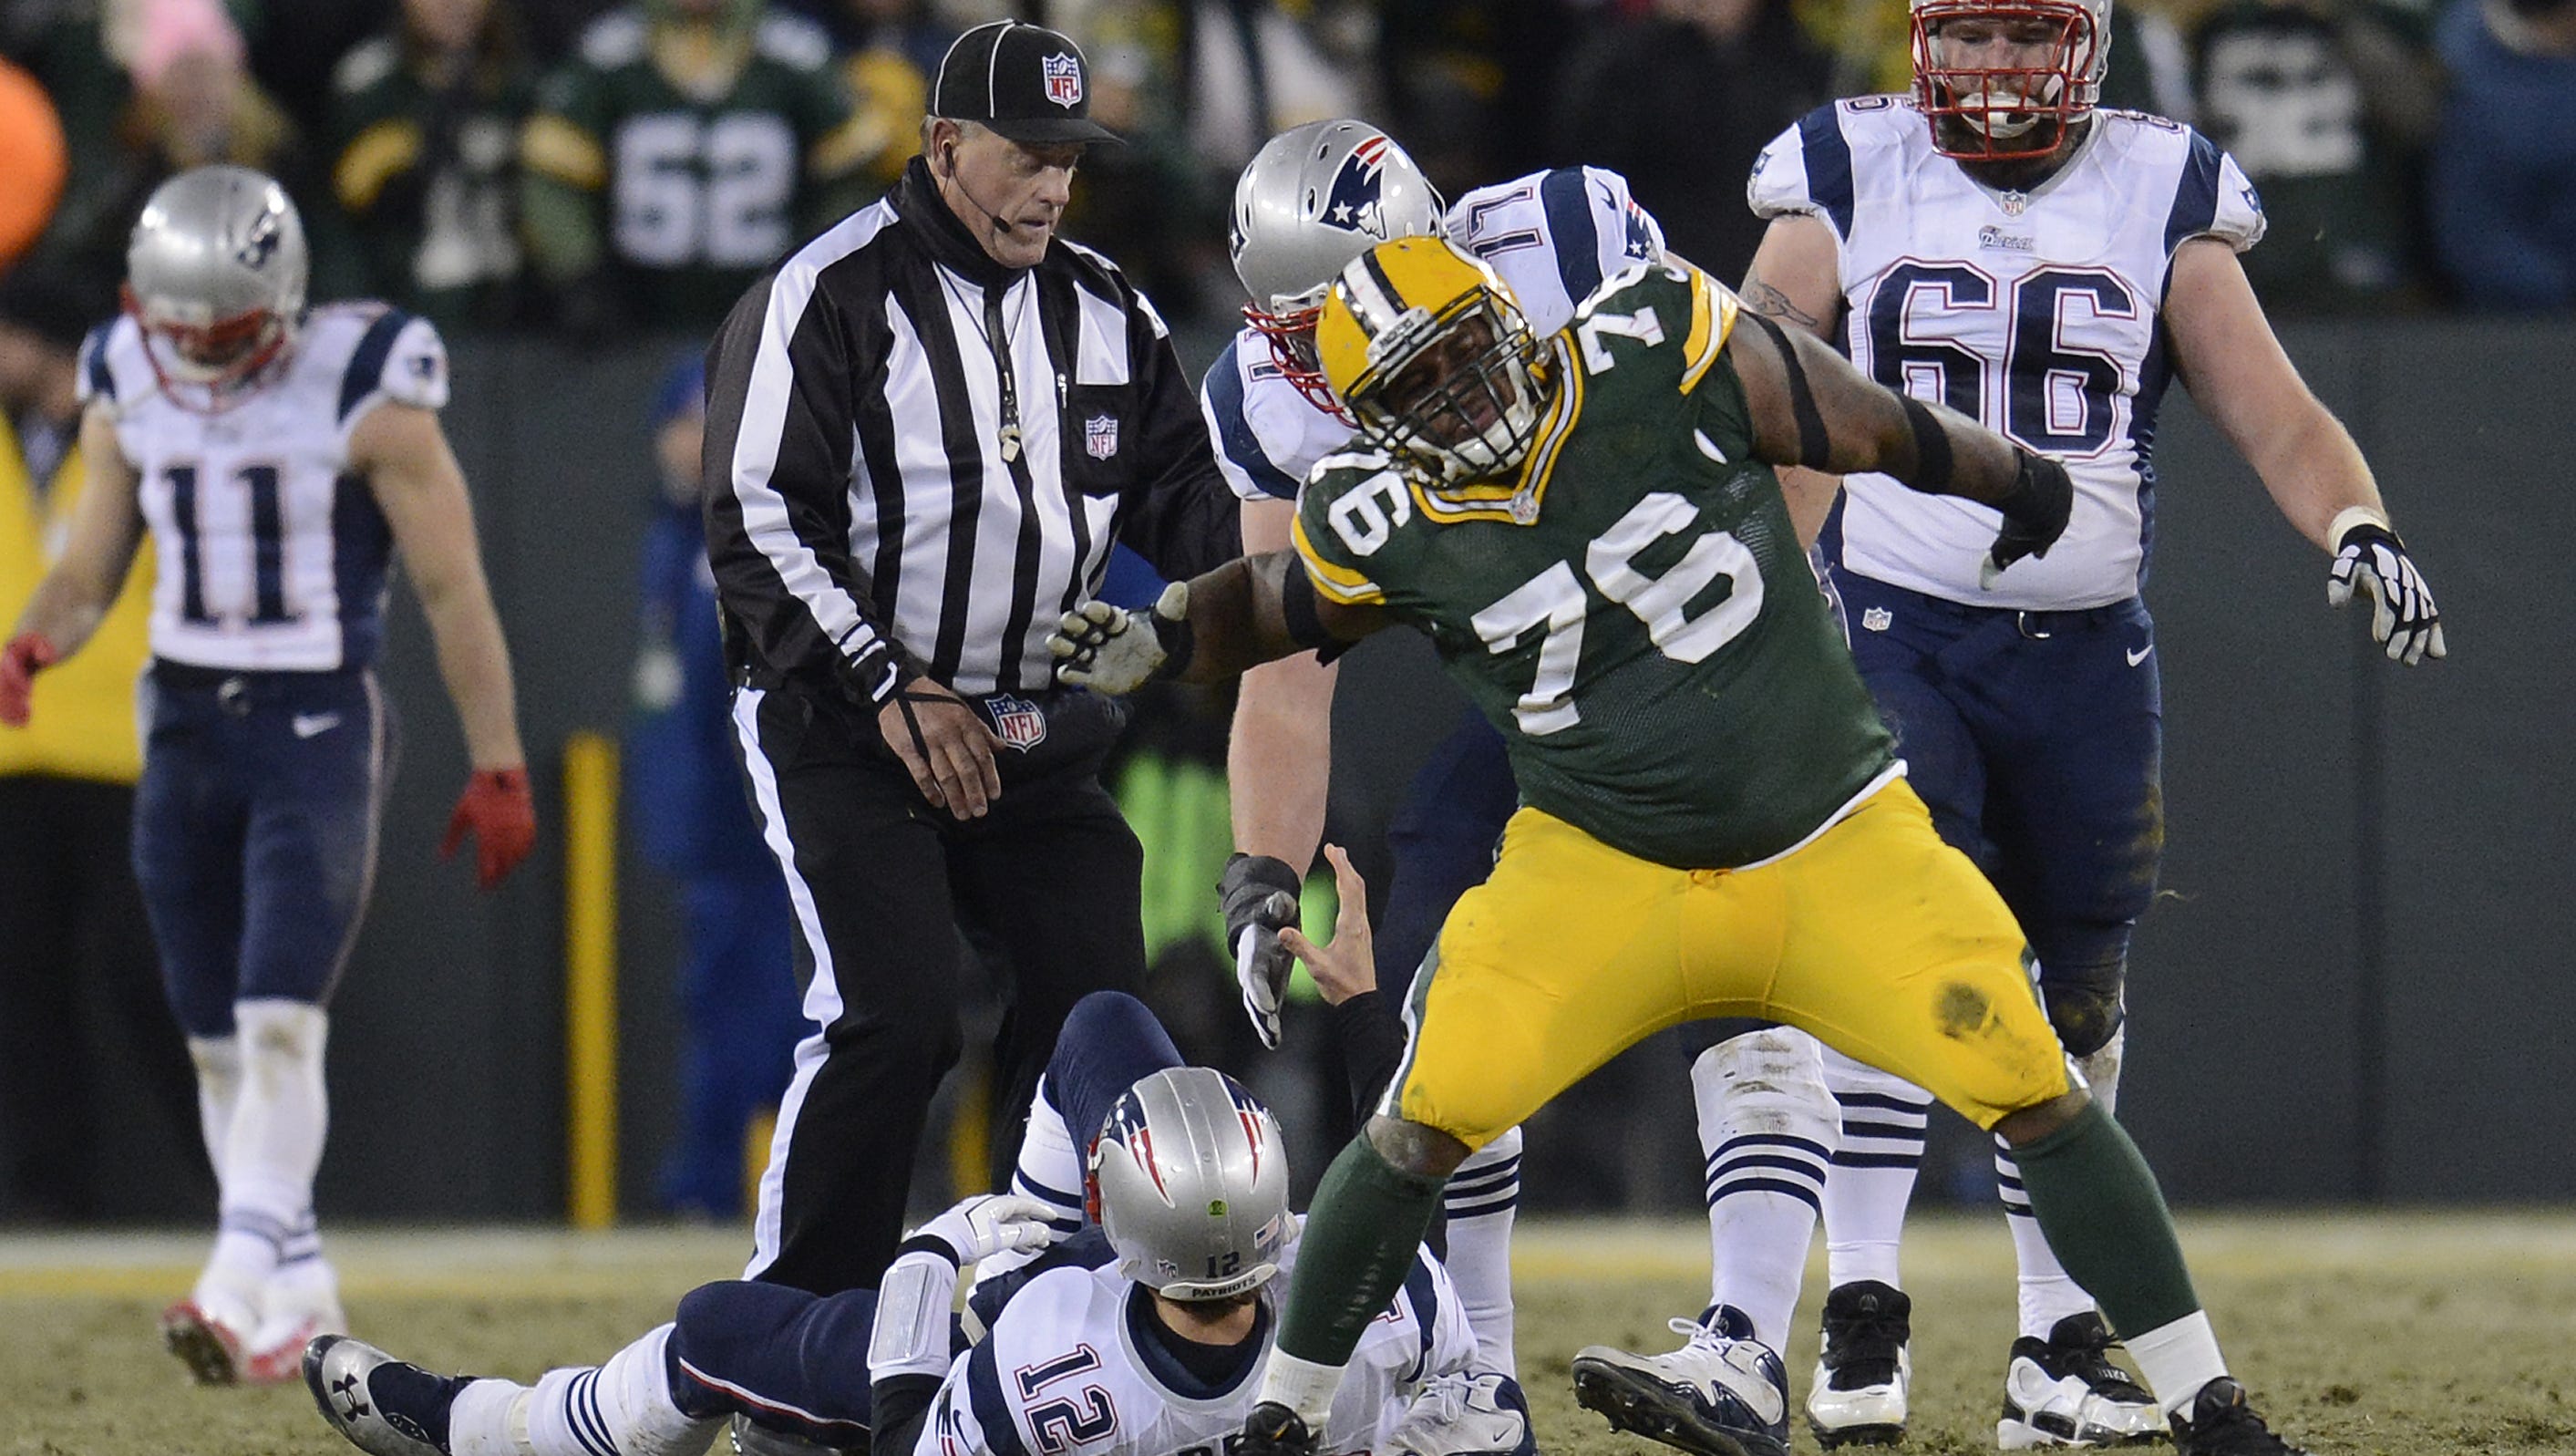 Green Bay Packers defensive tackle Mike Daniels (76) celebrates after sacking New England Patriots quarterback Tom Brady (12) late in the fourth quarter on Nov. 30, 2014, at Lambeau Field.